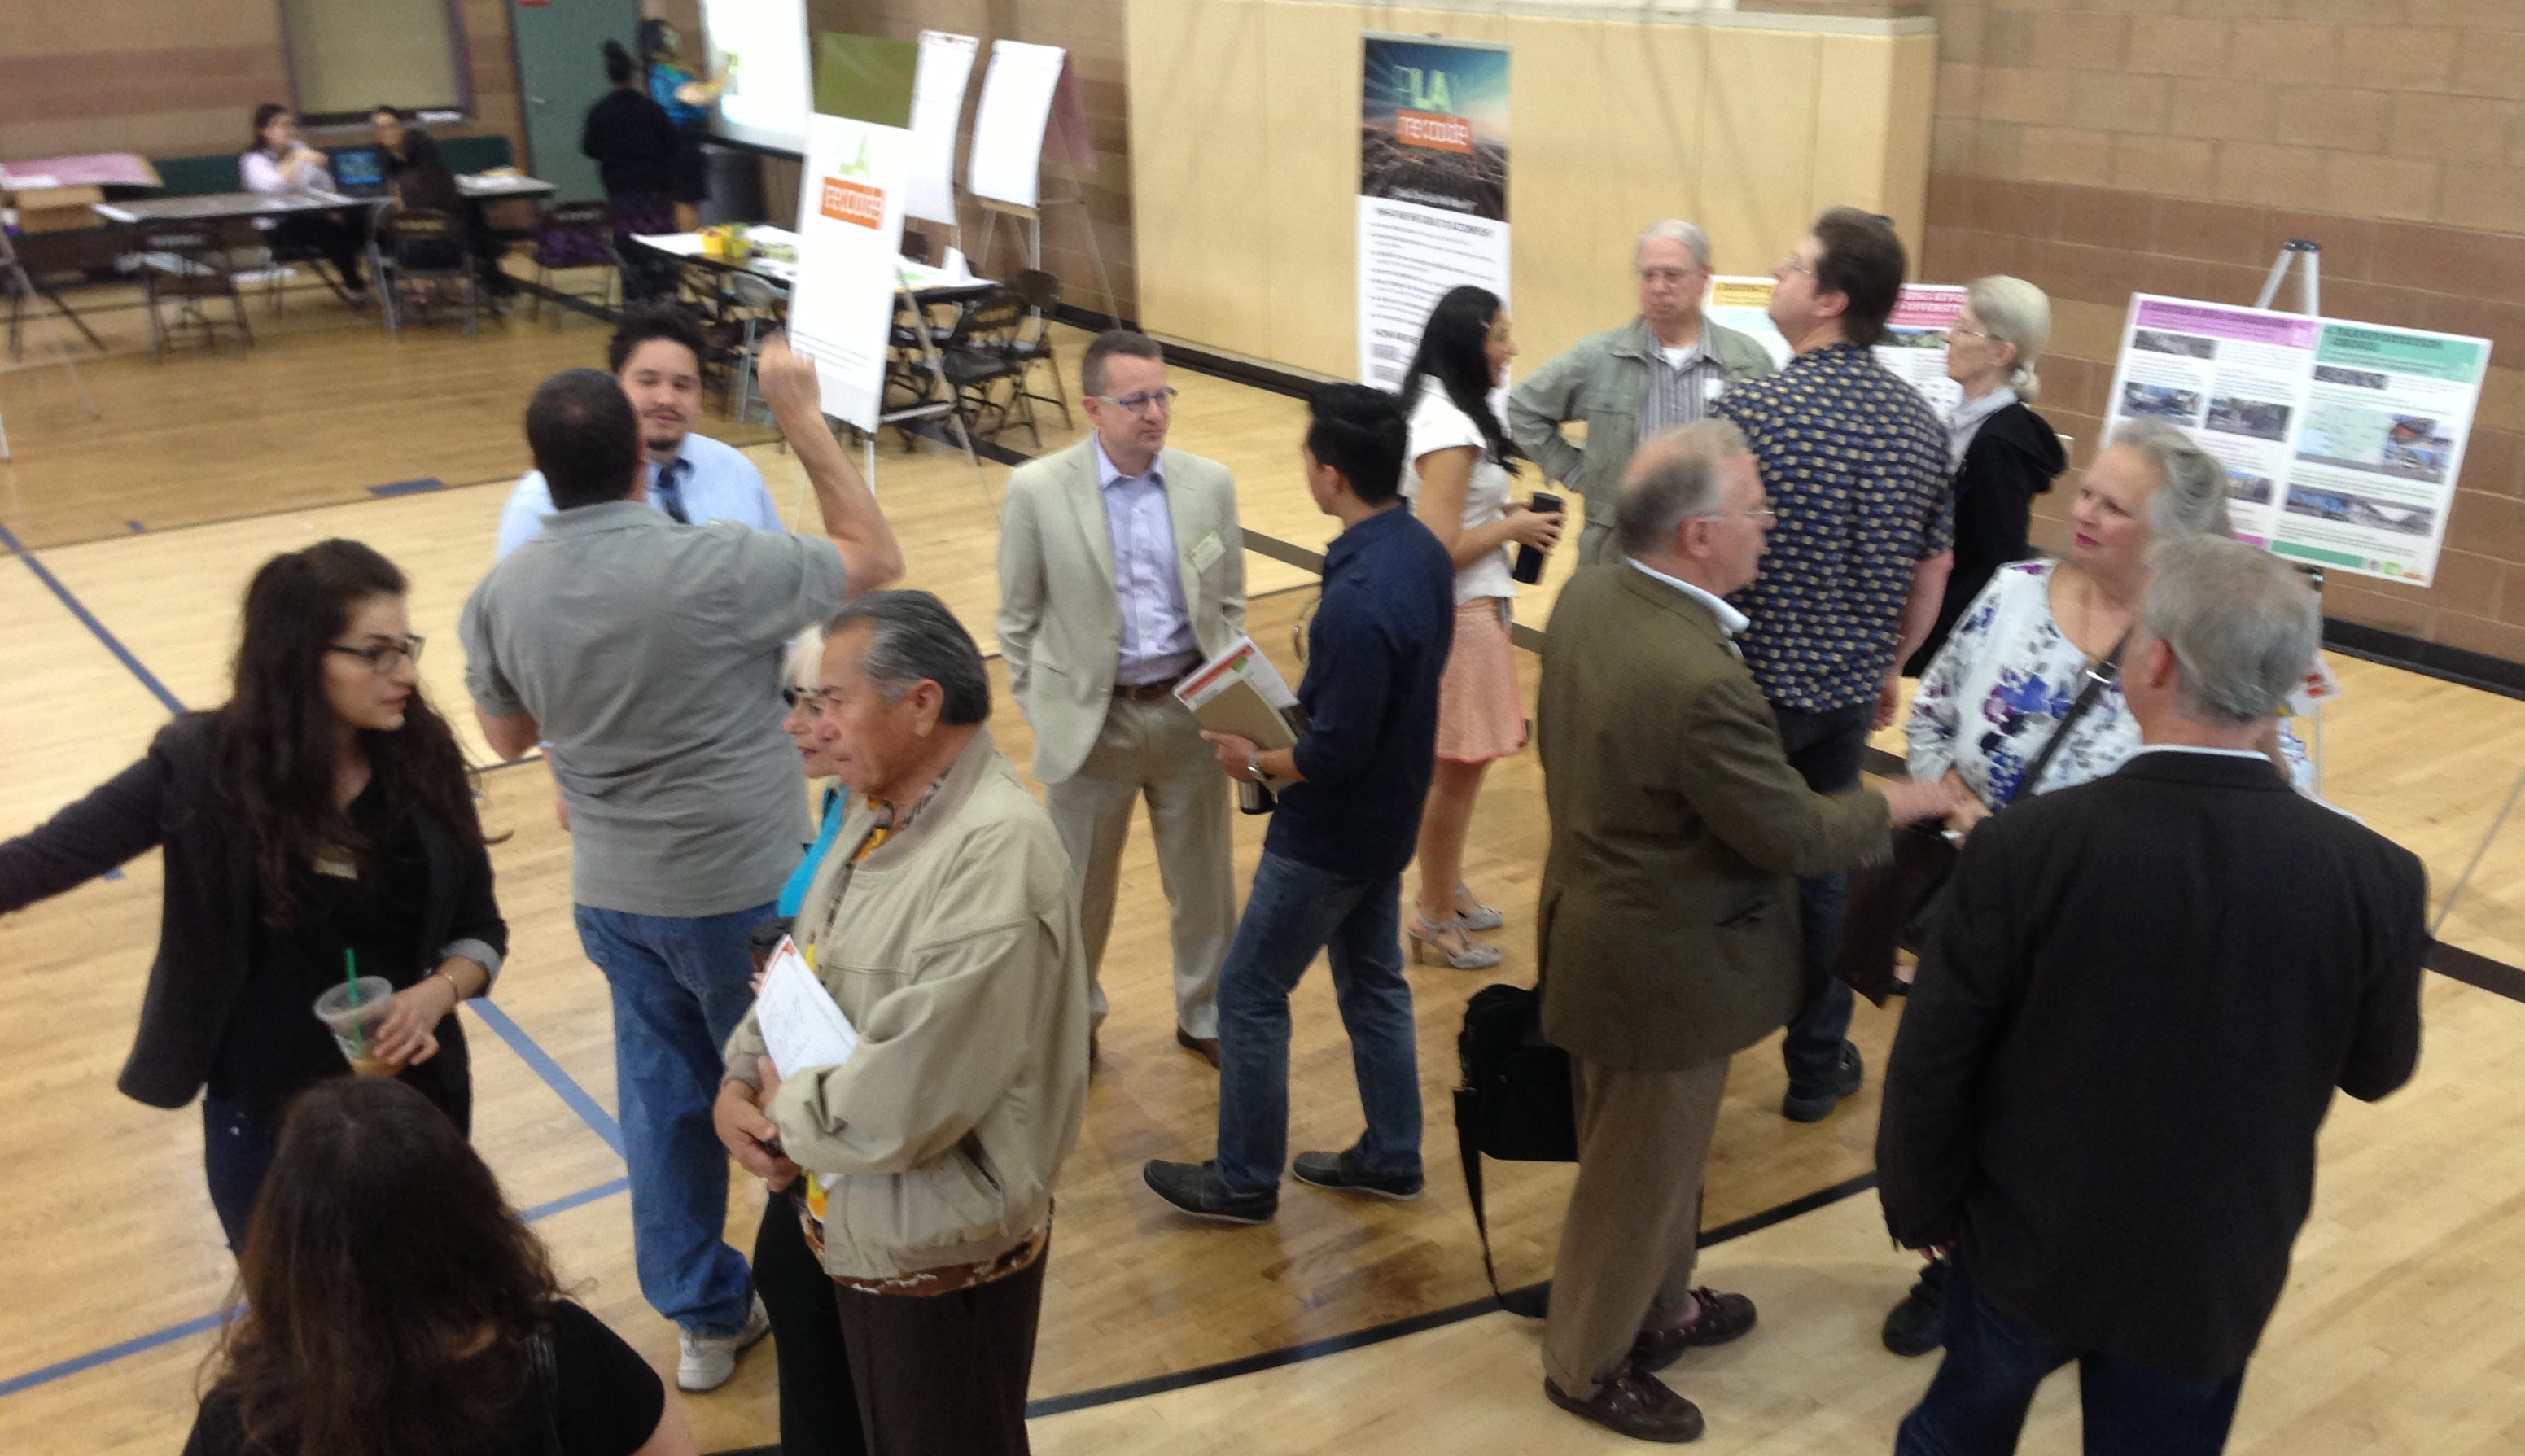 North Valley constituents express their opinions about the proposed plans. Which forum will you attend?